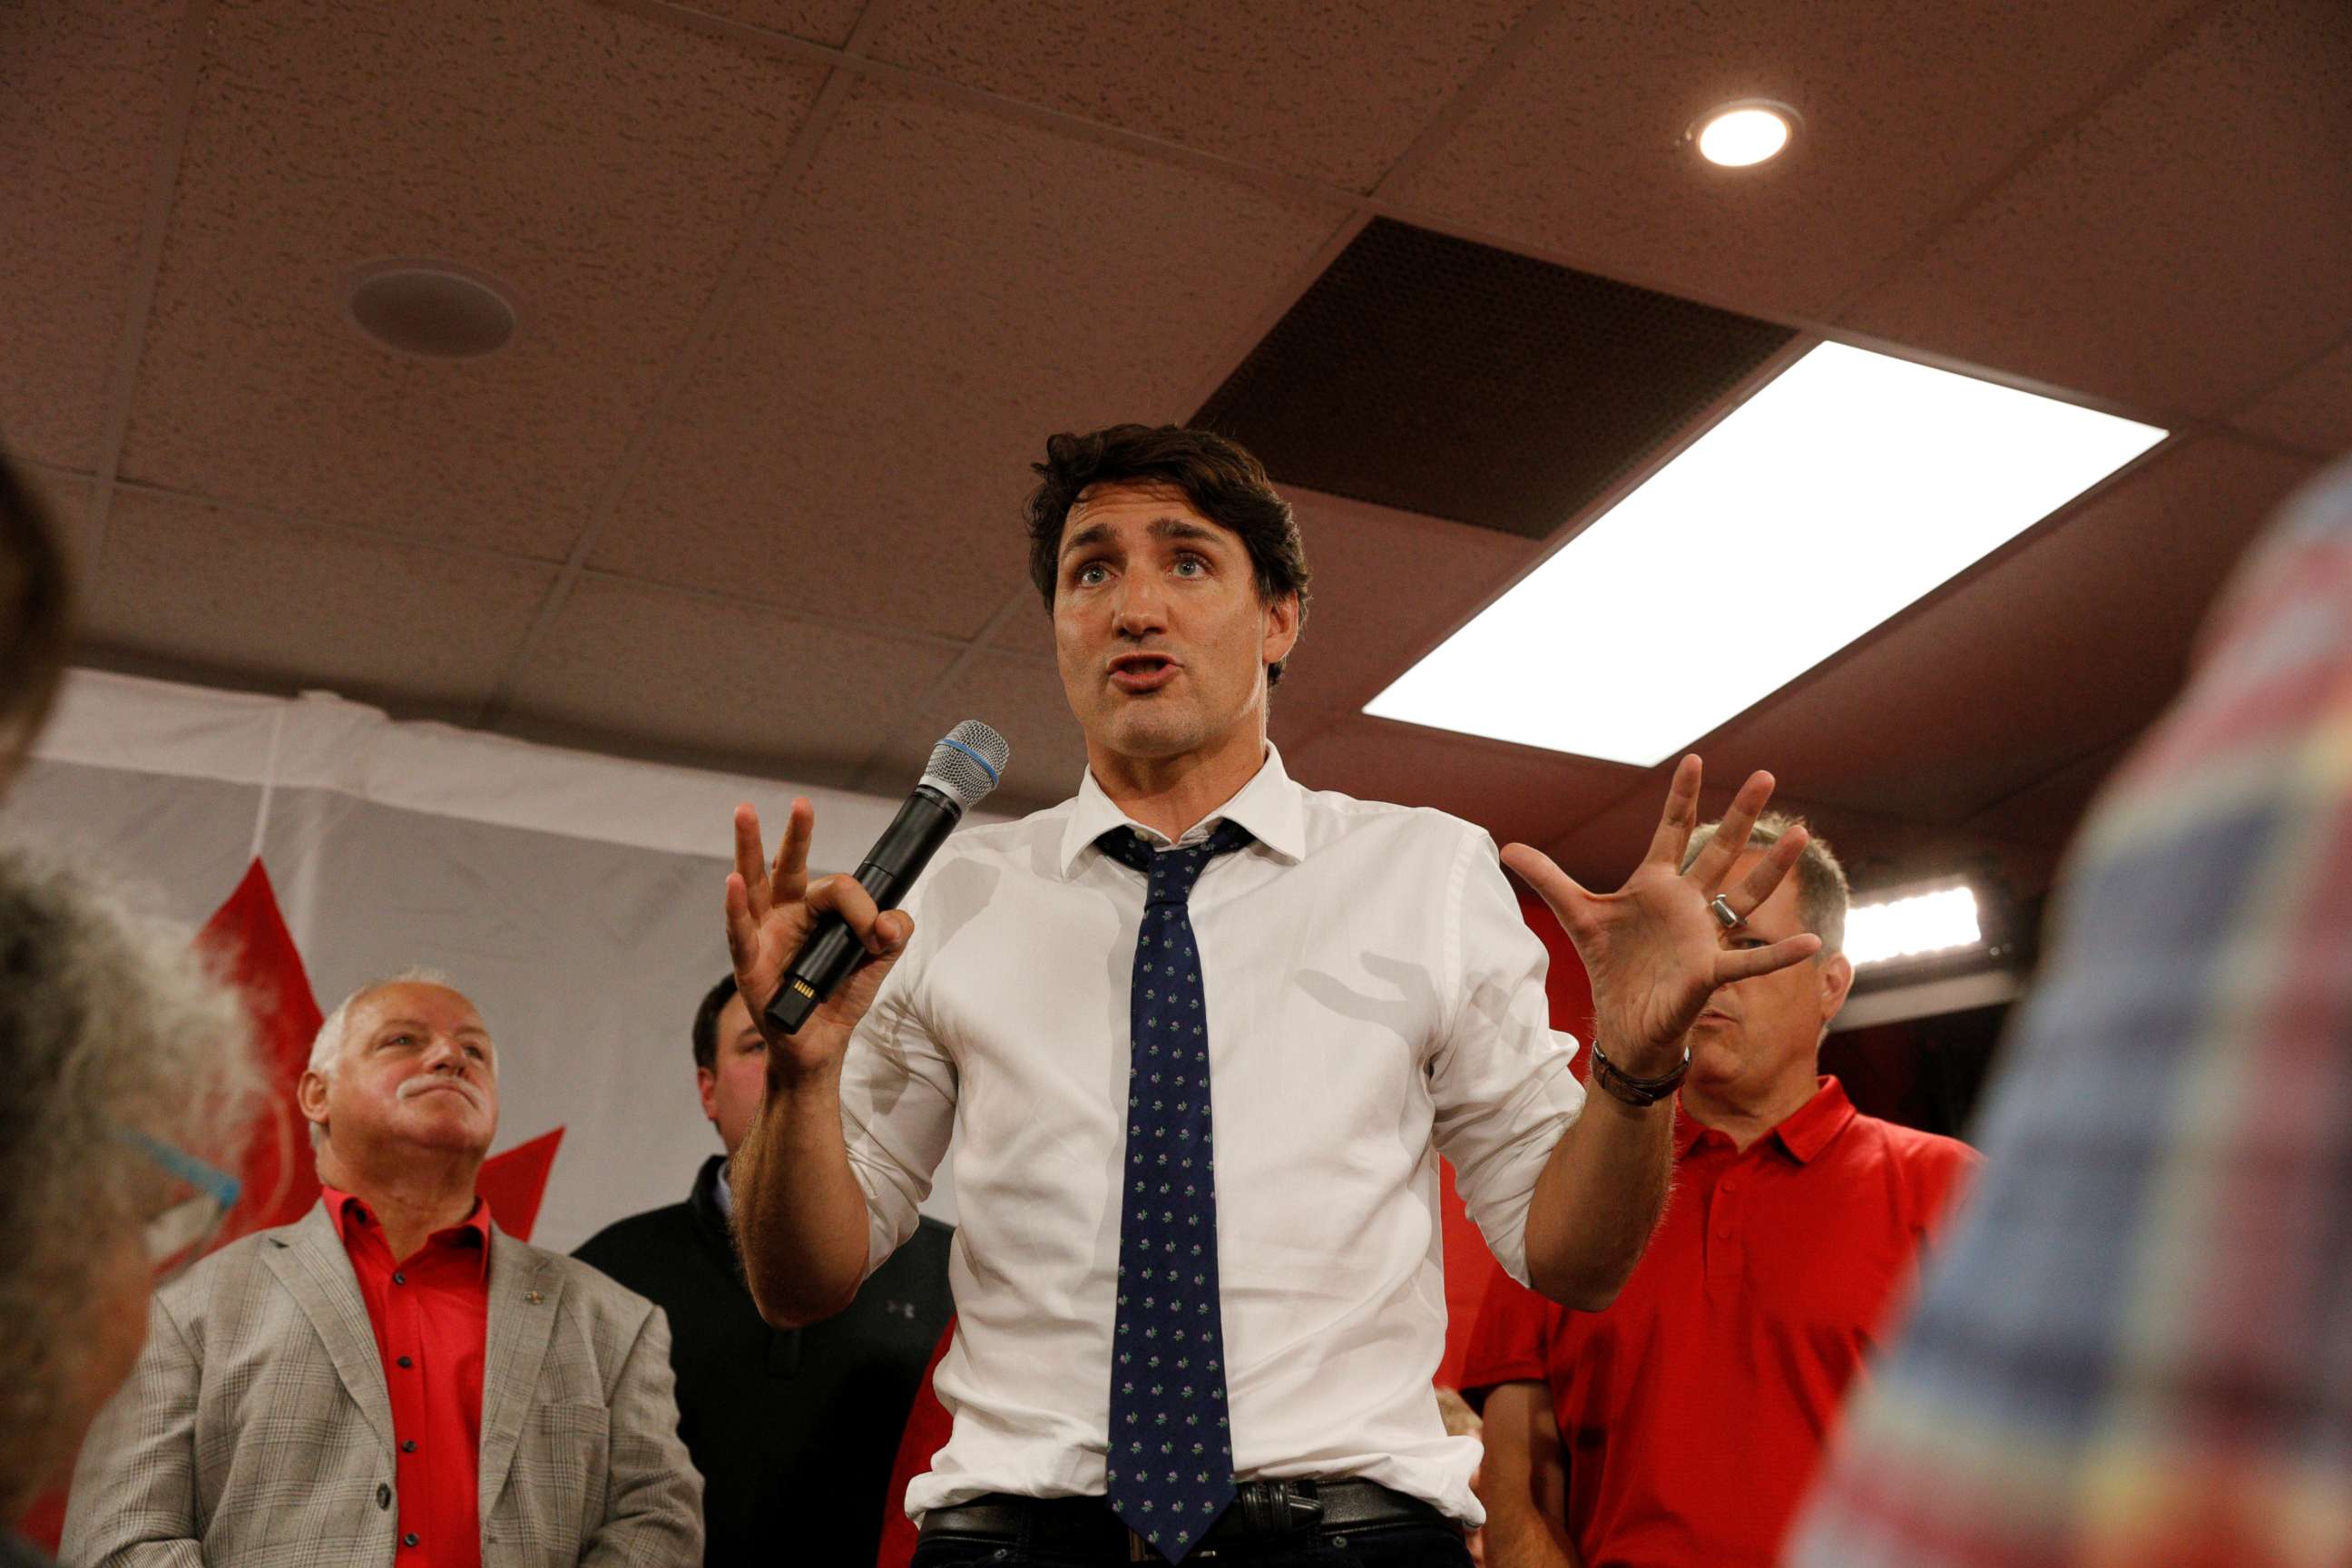 PHOTO: Canada's Prime Minister Justin Trudeau campaigns at federal liberal candidate Lenore Zann's office for the upcoming election in Truro, Nova Scotia, Sept. 18, 2019.